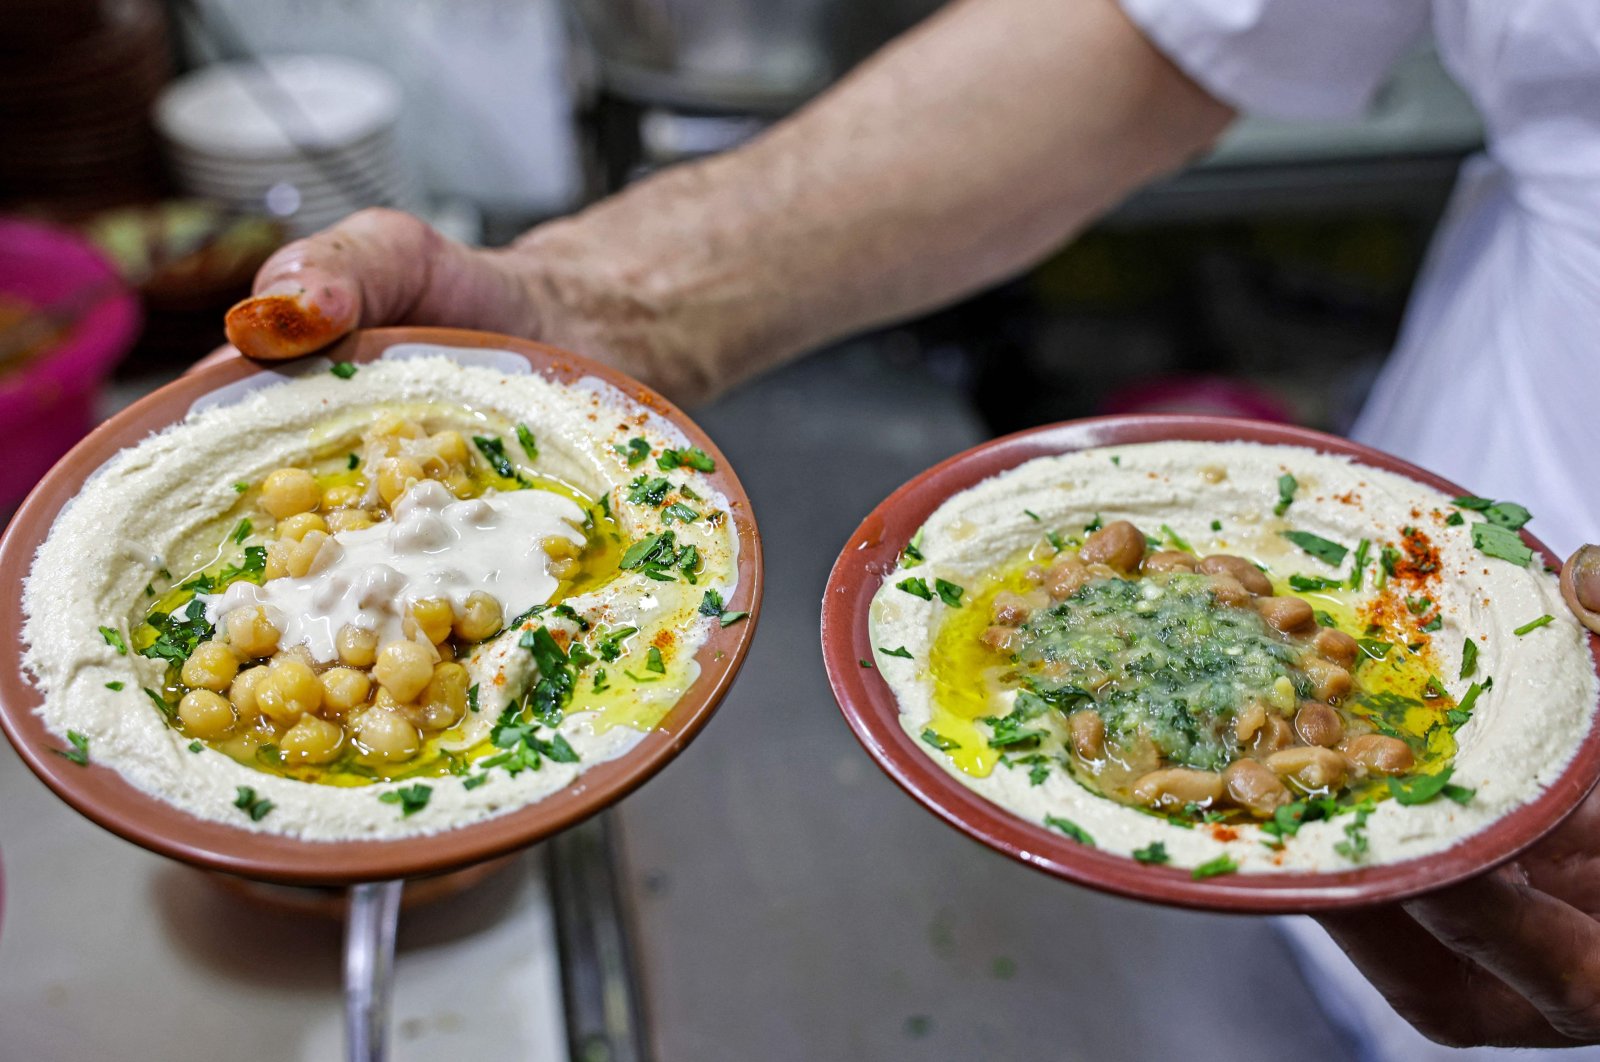 A cook prepares to serve plates of hummus and fava beans to be served to clients at a restaurant in the Old City of Jerusalem, occupied Palestine, July 26, 2022. (AFP Photo)